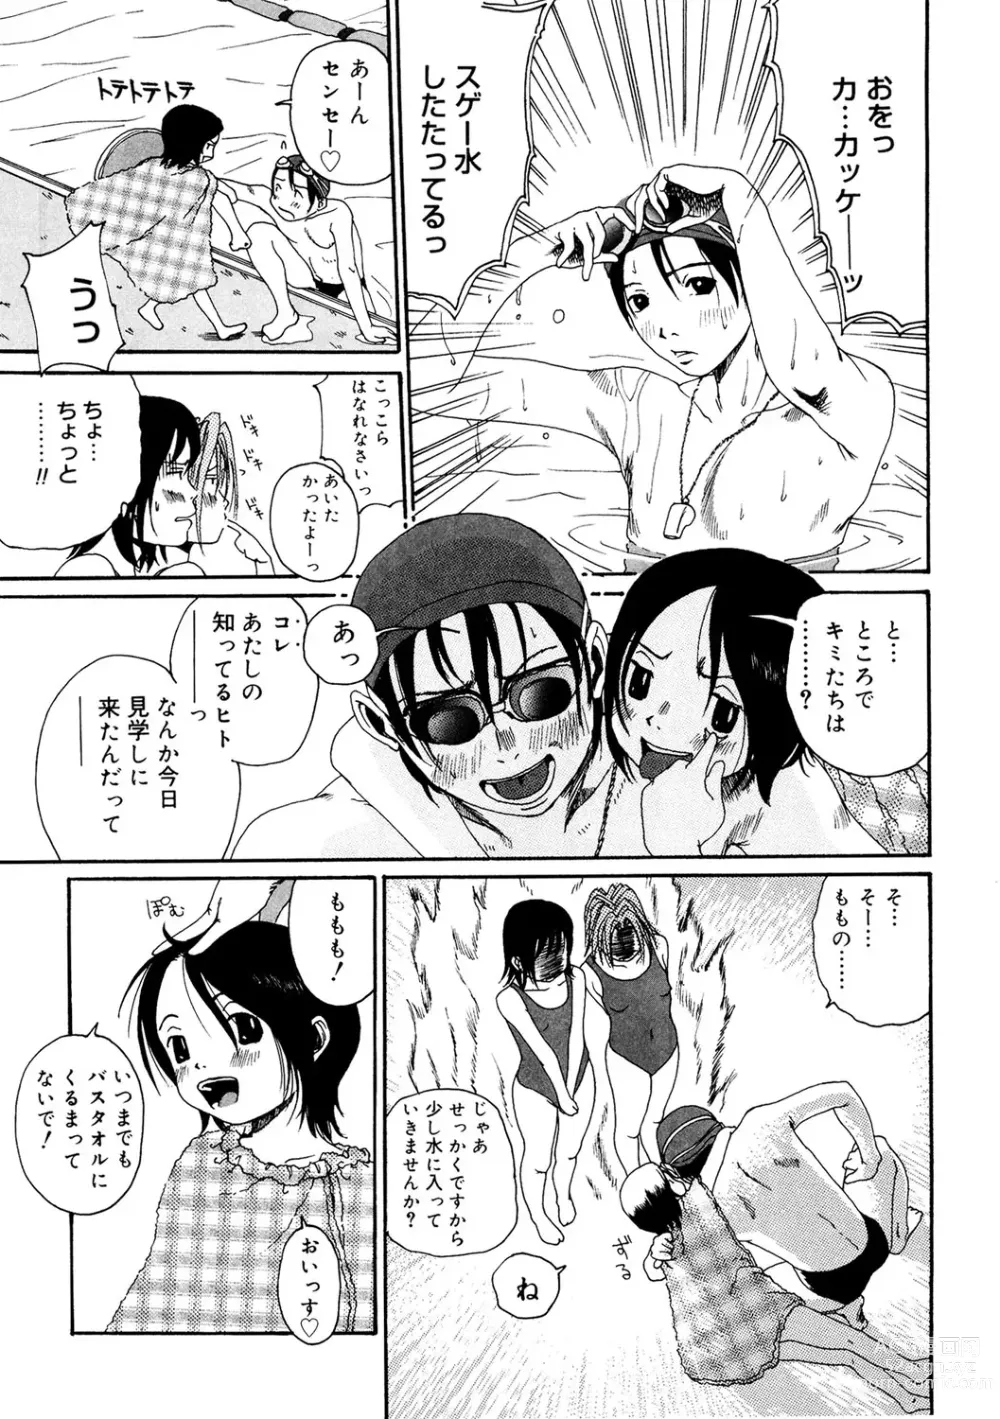 Page 185 of manga LQ -Little Queen- Vol. 52